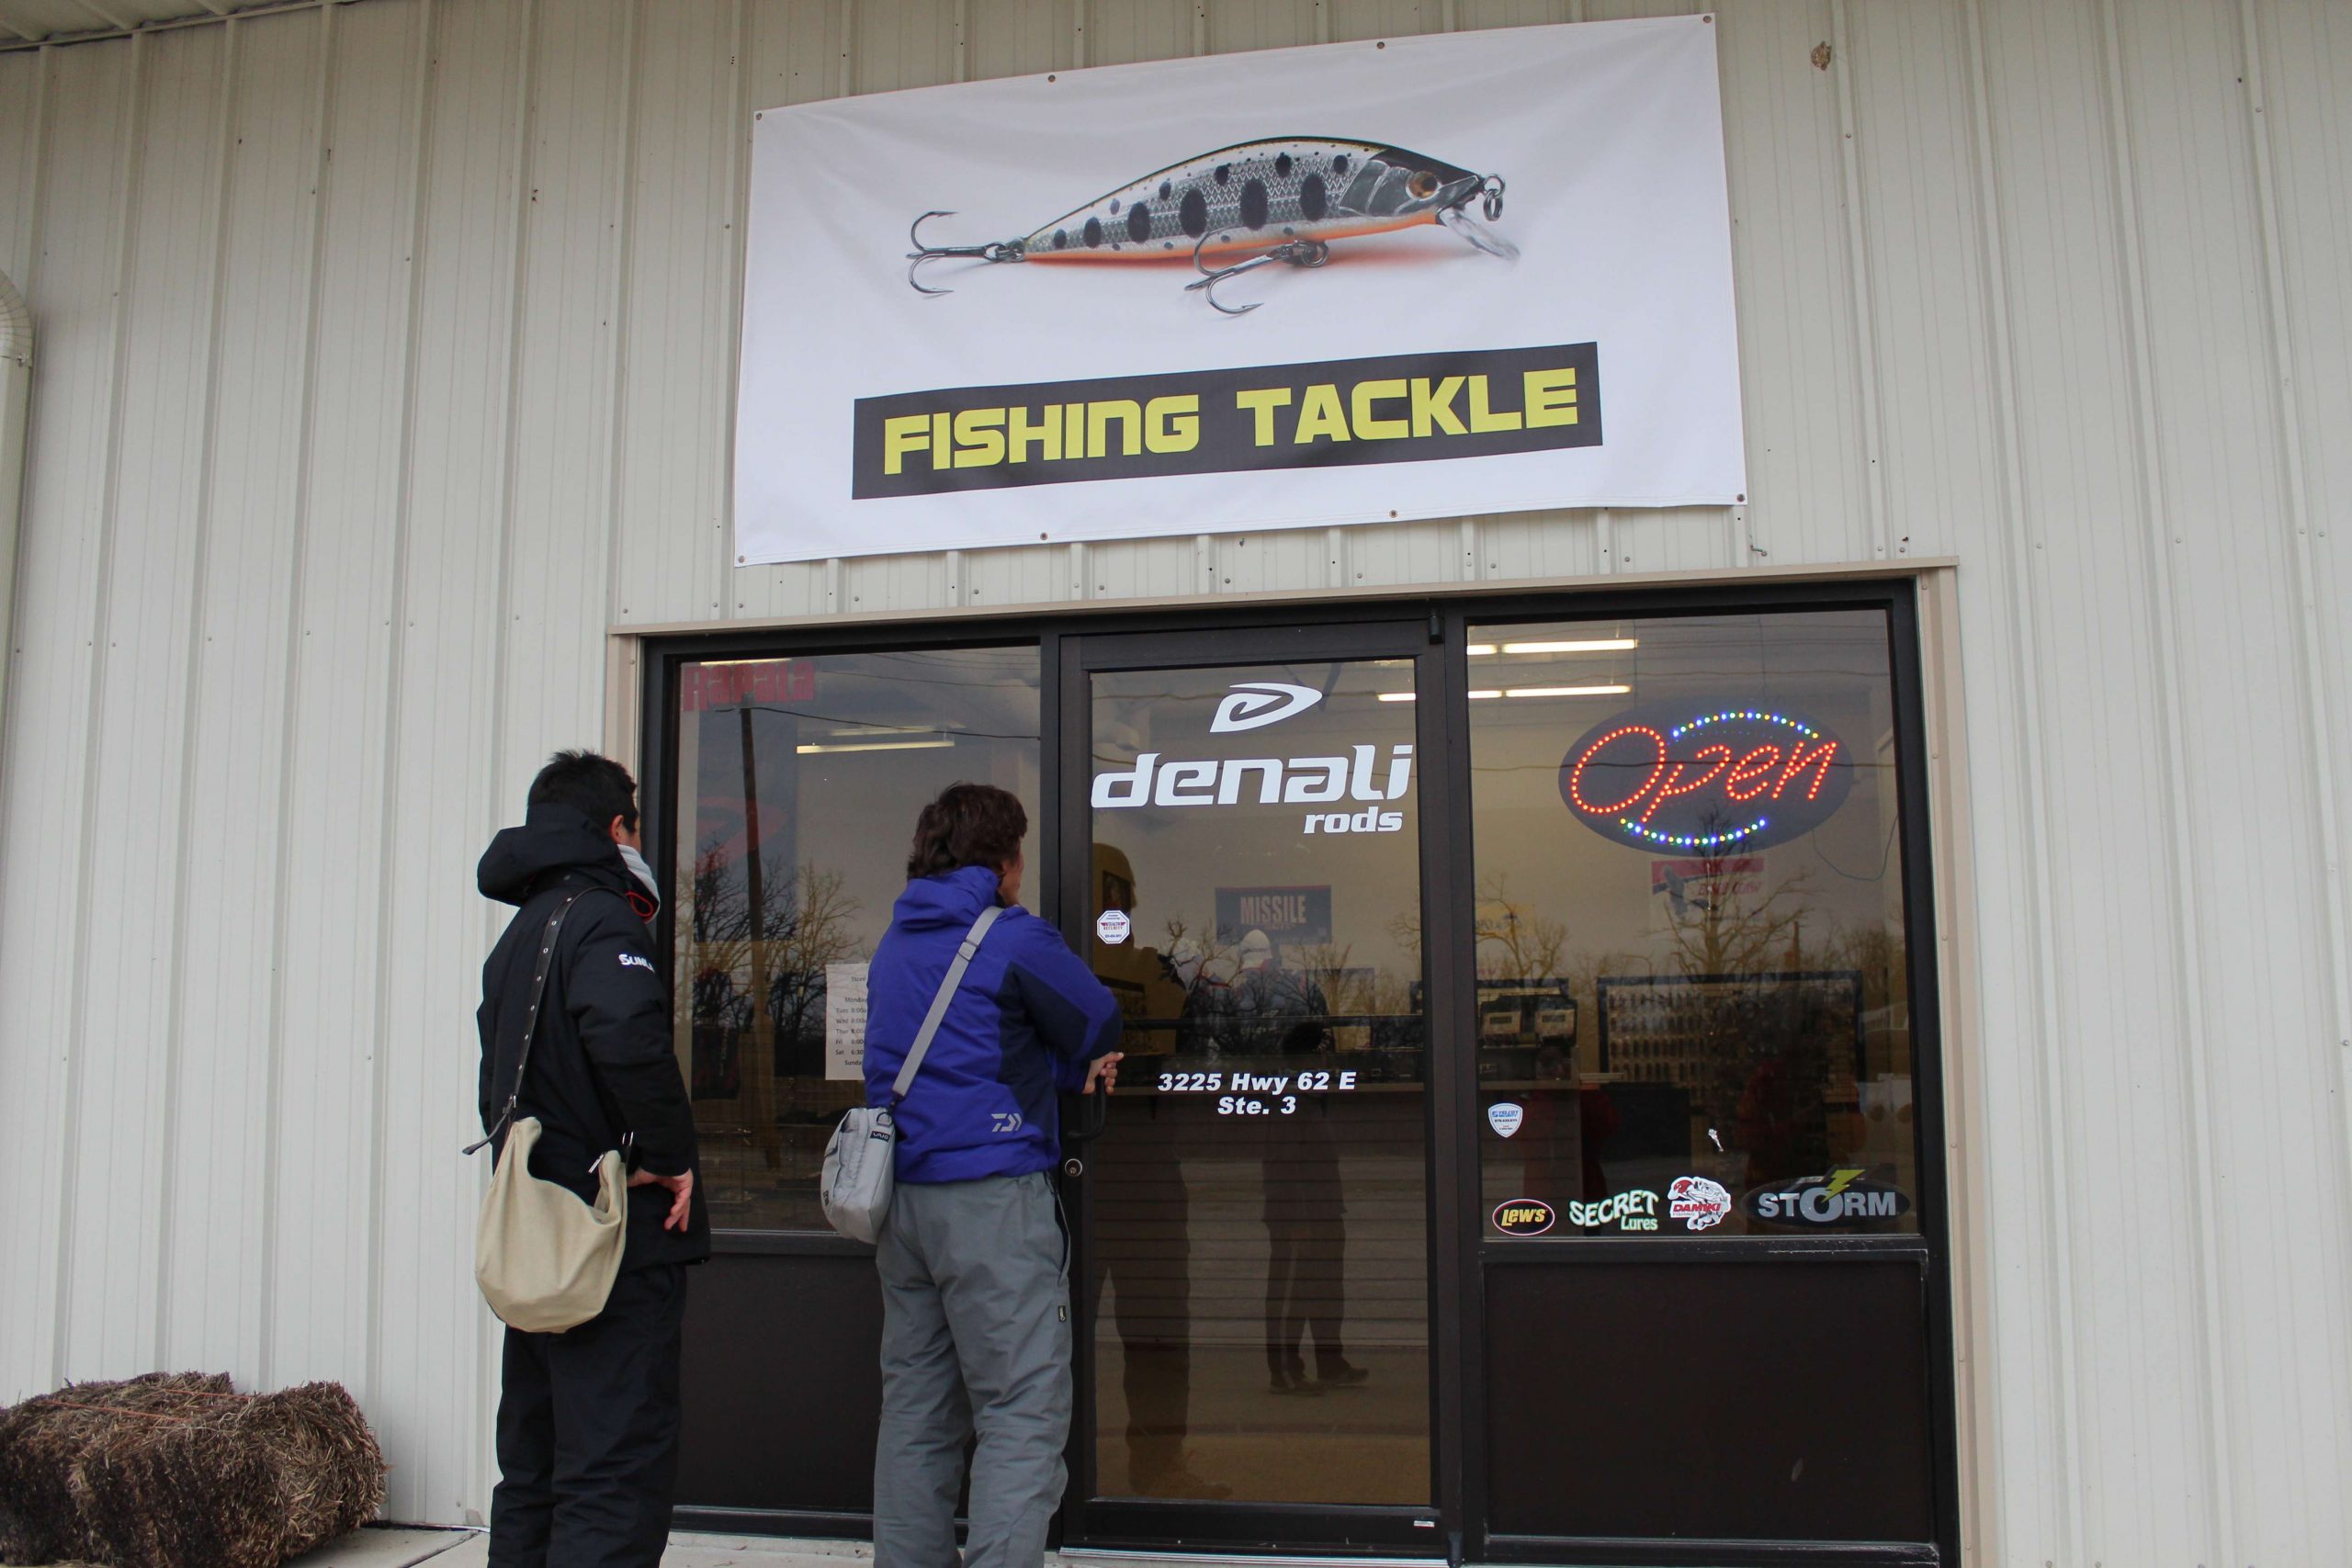 The team shopped at a nearby tackle depot and stocked up on baits and info.